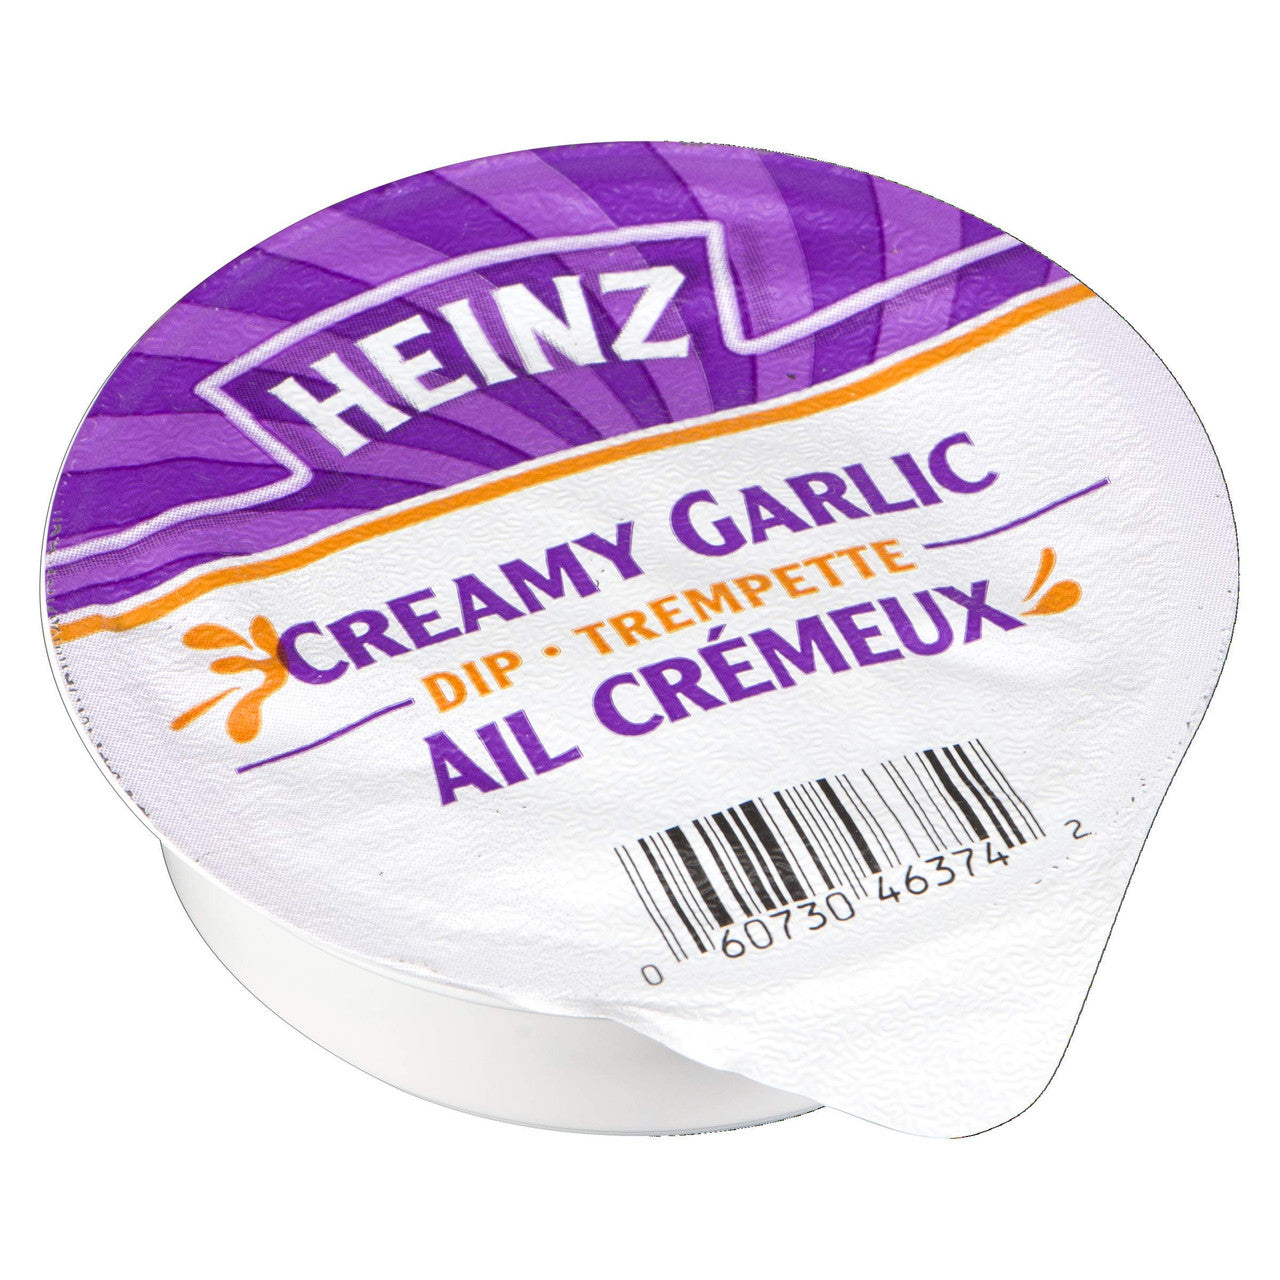 HEINZ Creamy Garlic Dip Cups, 44ml Cups, 100 Count, {Imported from Canada}